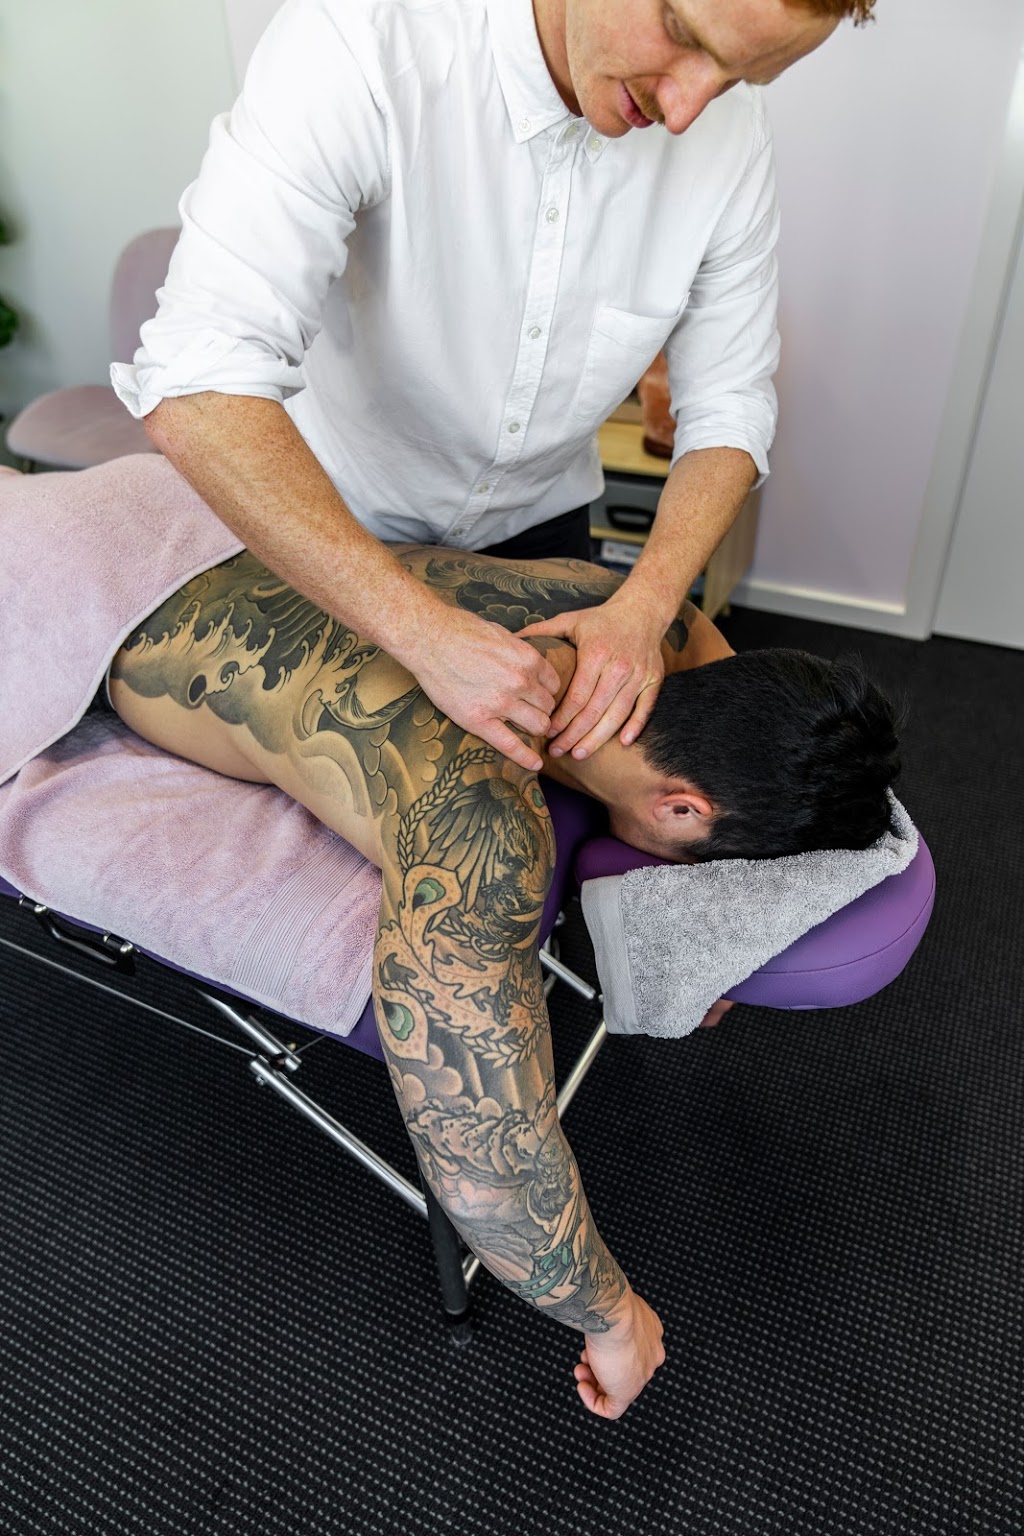 The Osteo Joint | health | 11/7 Lloyd St, West Melbourne VIC 3003, Australia | 0411748839 OR +61 411 748 839